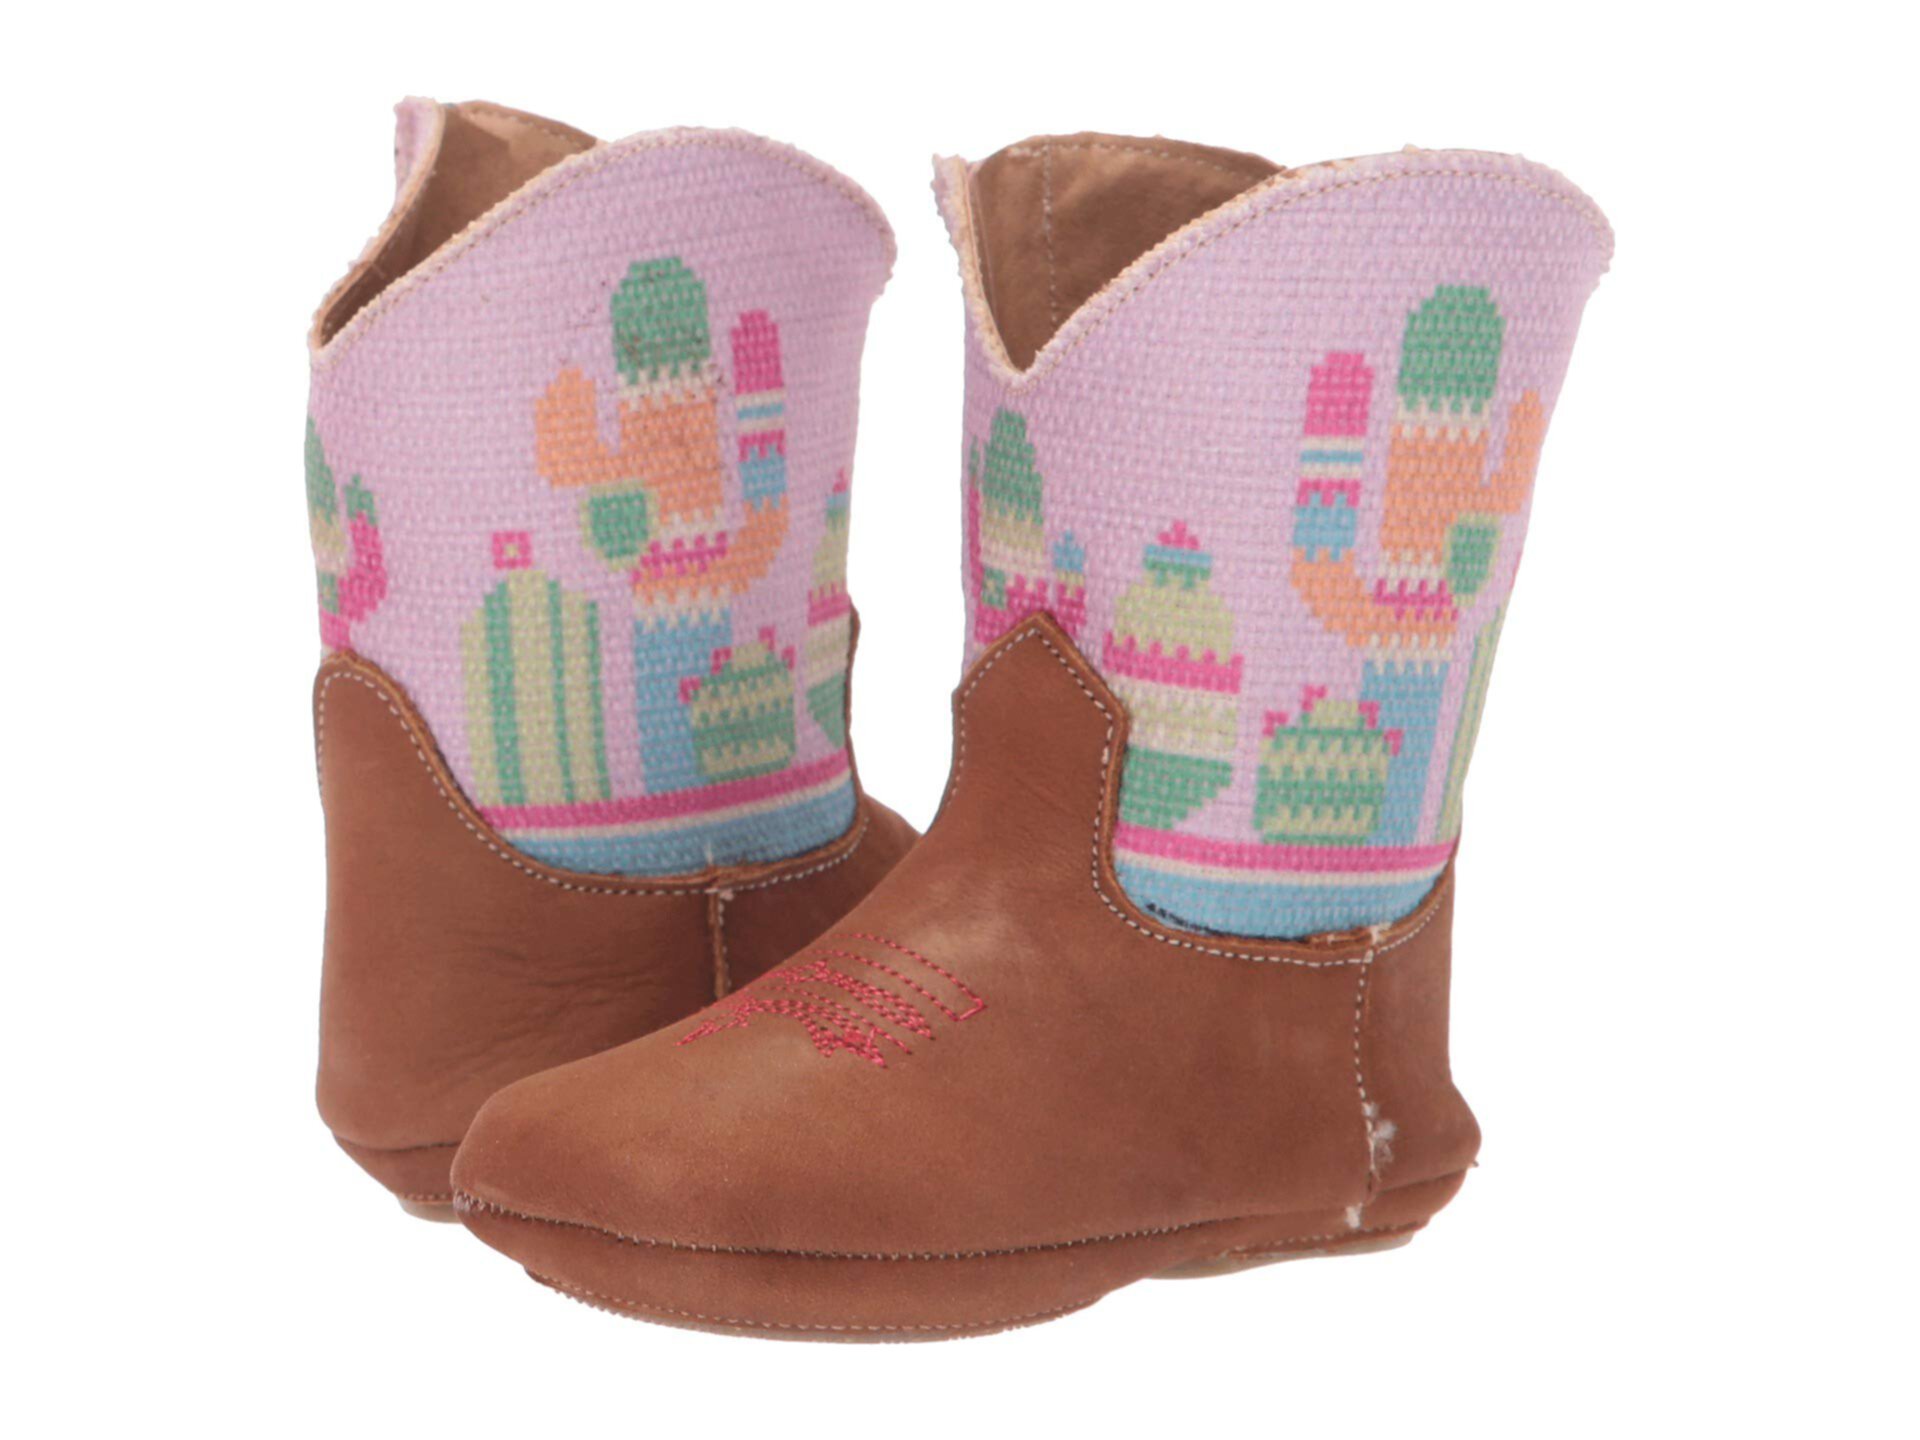 Cowbaby Colorful Cactus (Младенец / Малыш) Roper Kids